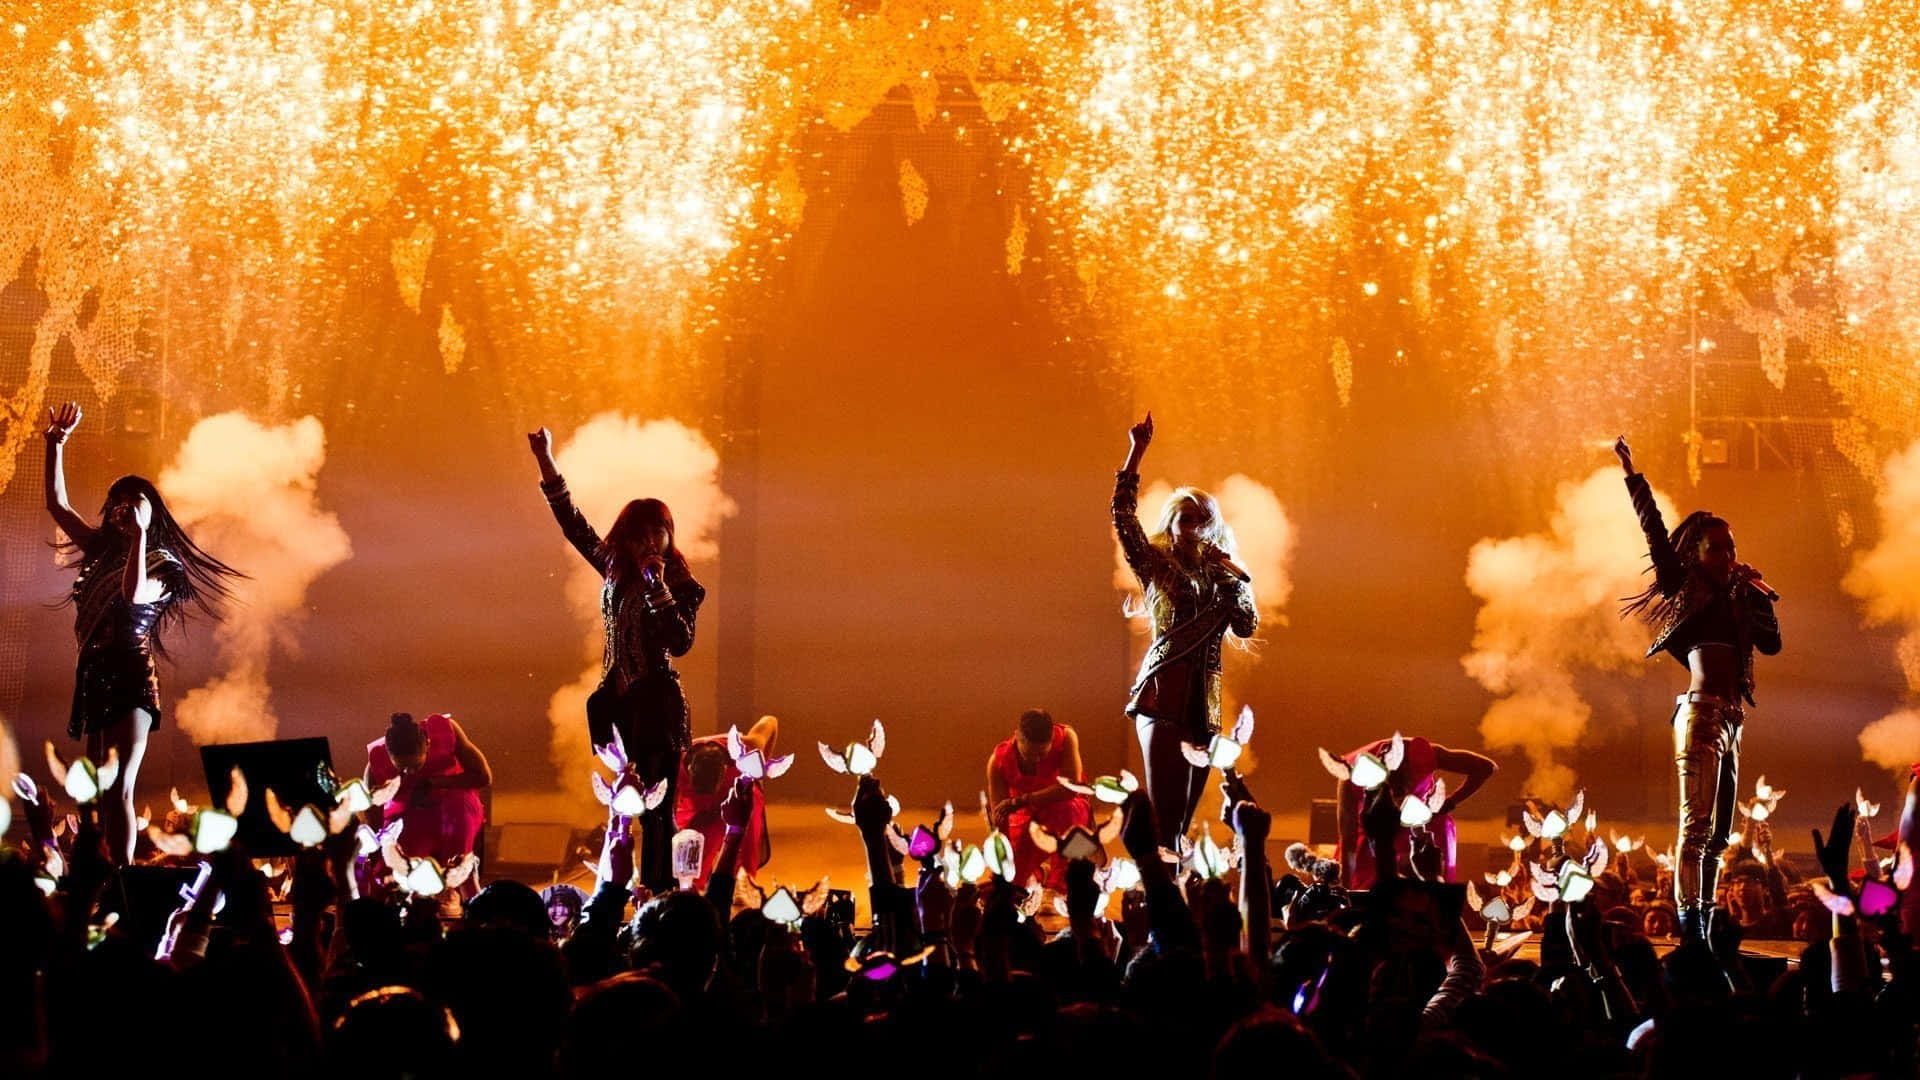 A Group Of Girls On Stage With Fireworks